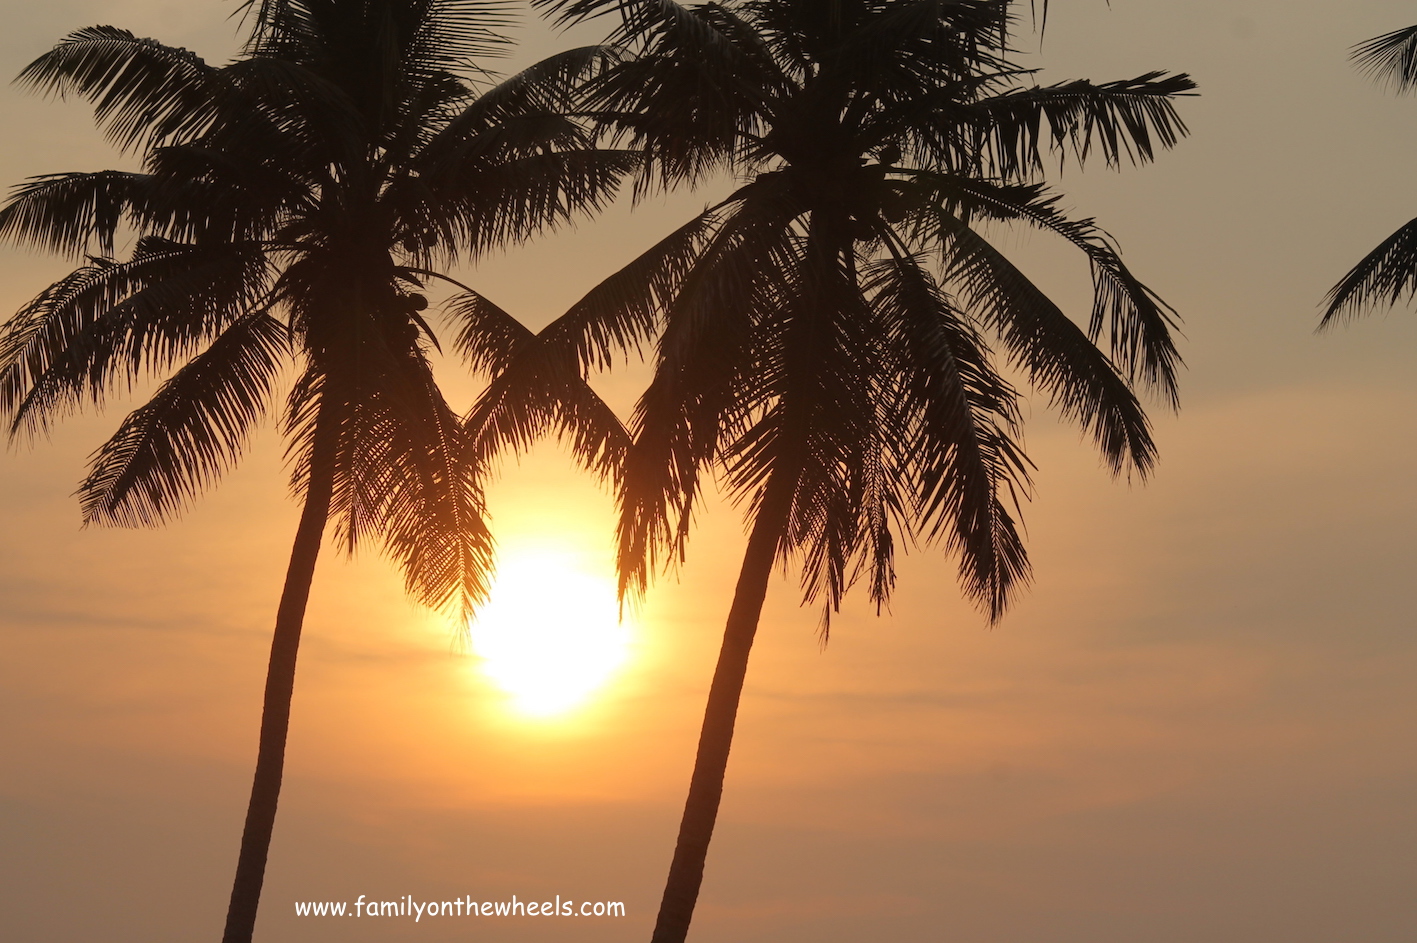 Gorgeous sunset over the backwaters in kerala. #canals #Kerala #alleppey #backwaters #keralabackwaters #sunset #beaches #naturelover #sun